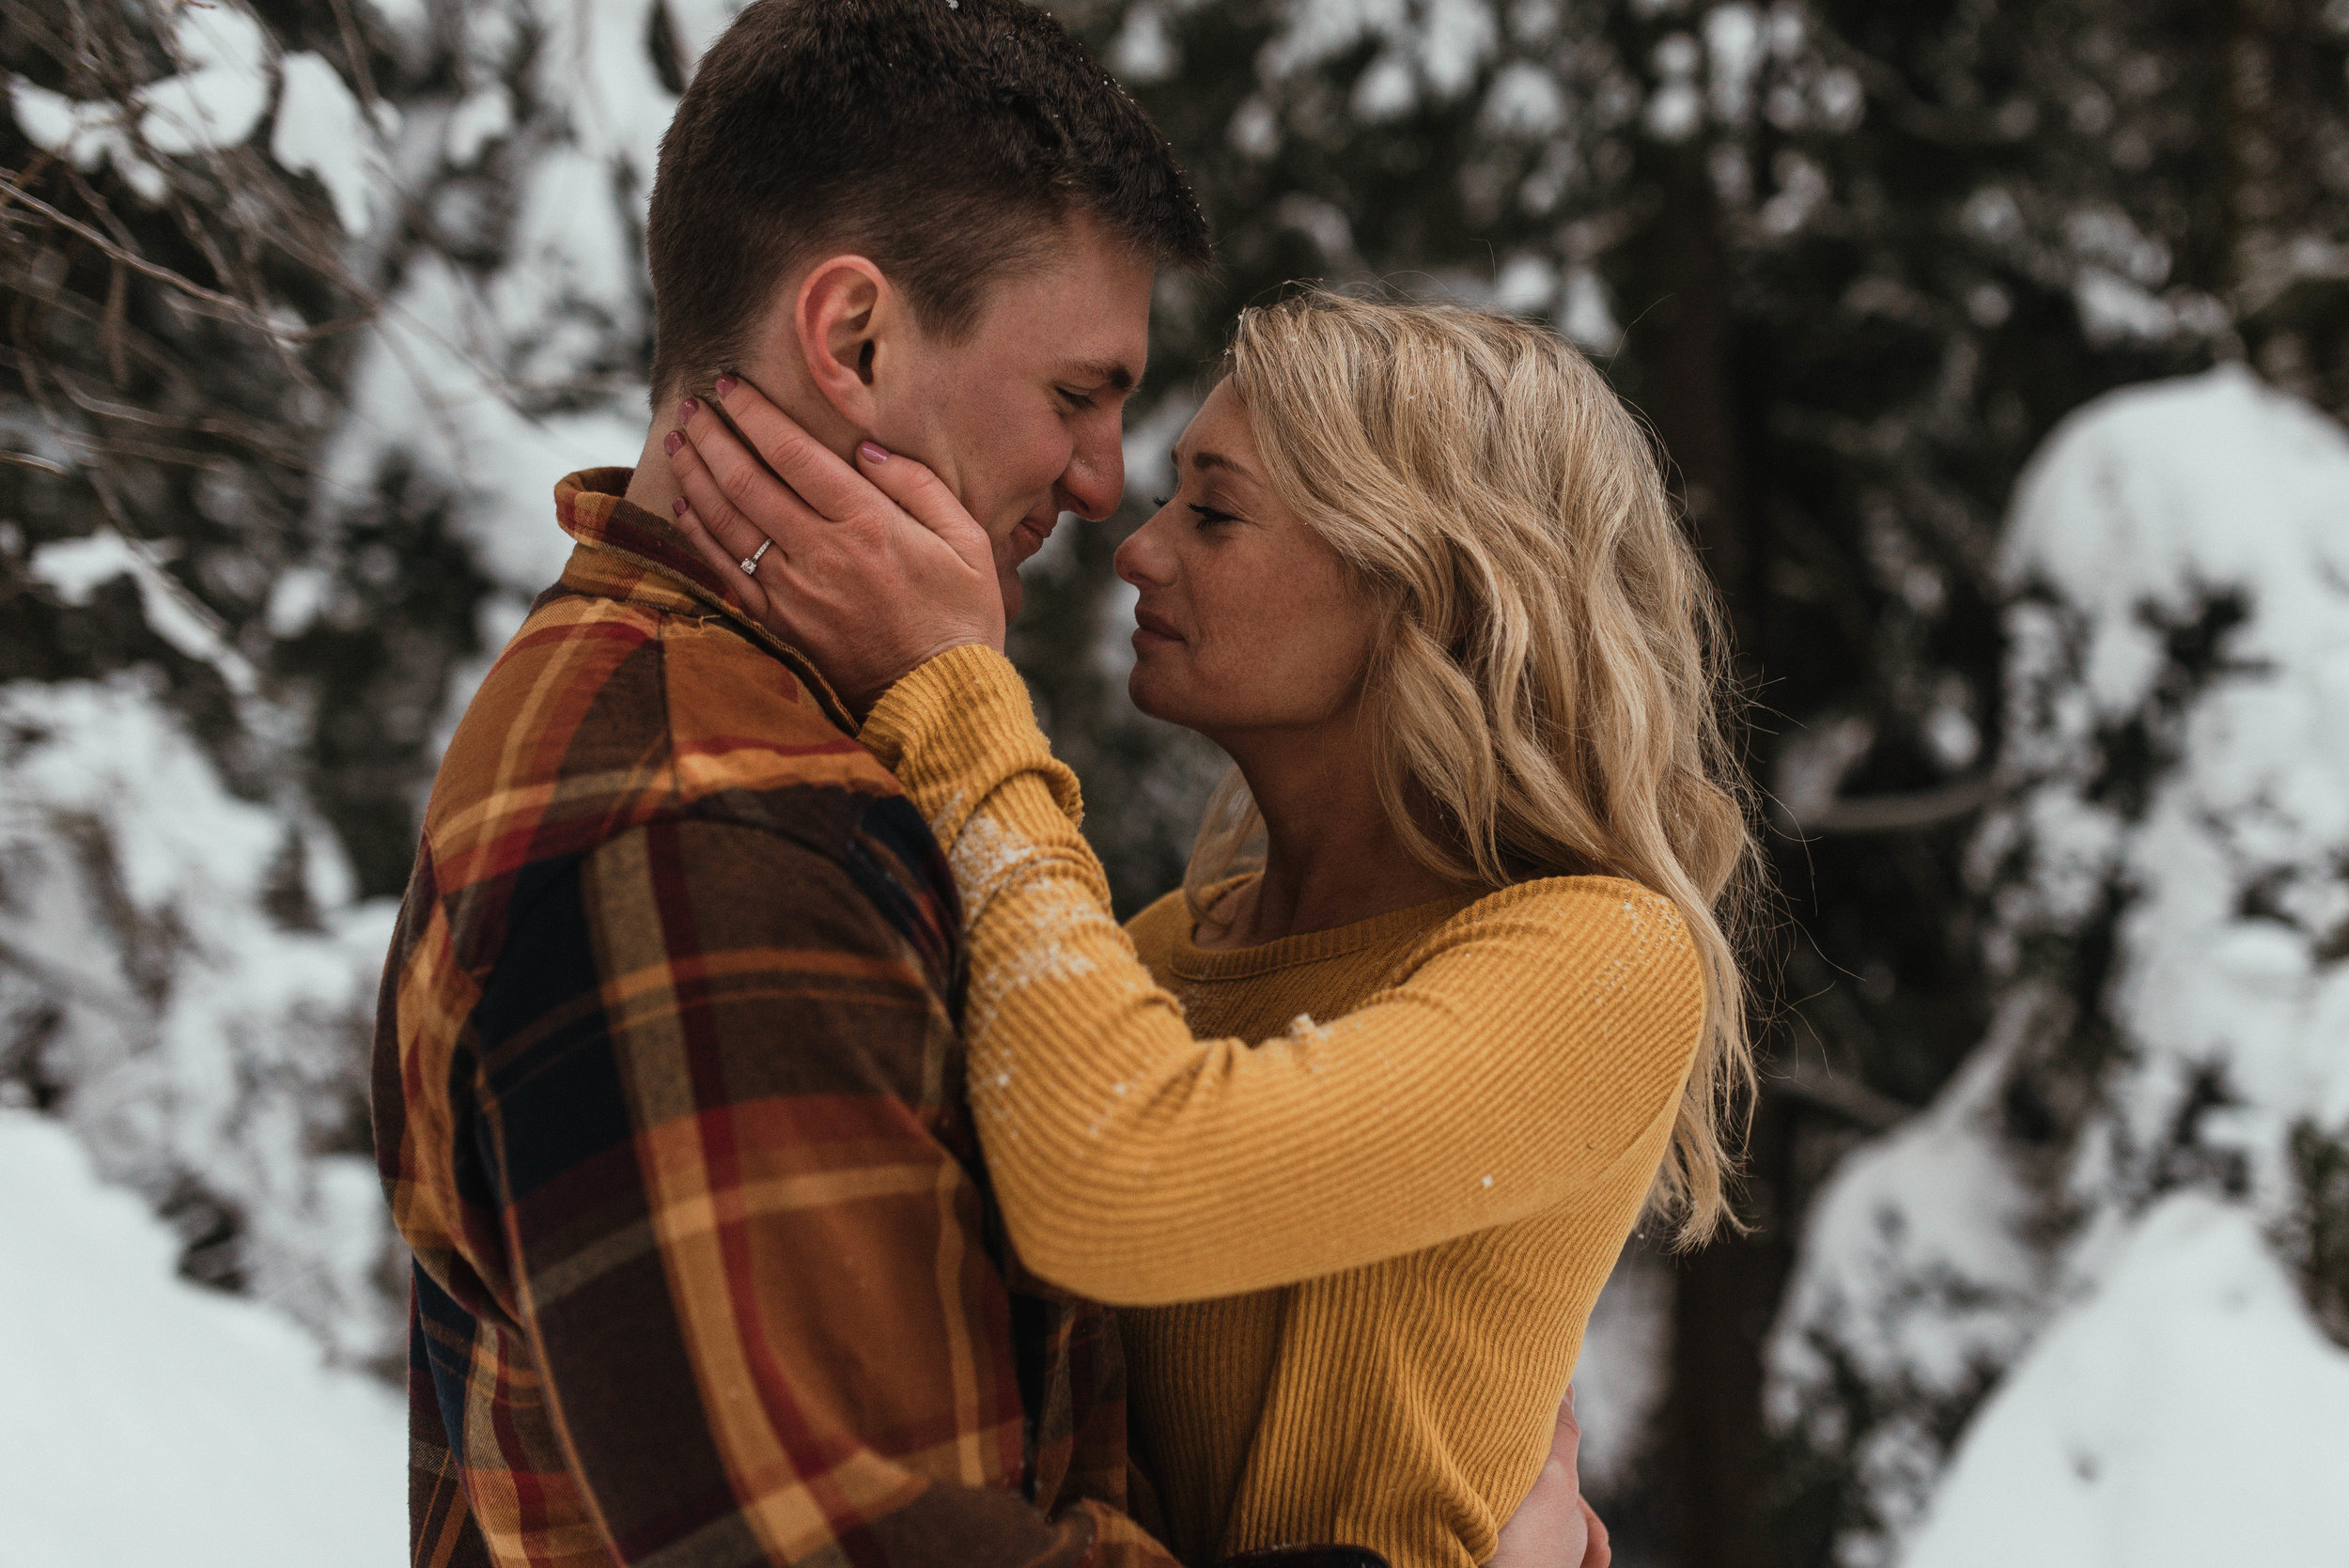 Columbia River Gorge Engagment Session | Engagement Photo Ideas | Snow Engagemens | Winter Engagement | Jessicaheronimages.com | Oregon Waterfall Engagment | Oregon Photographer | PNW Engagment